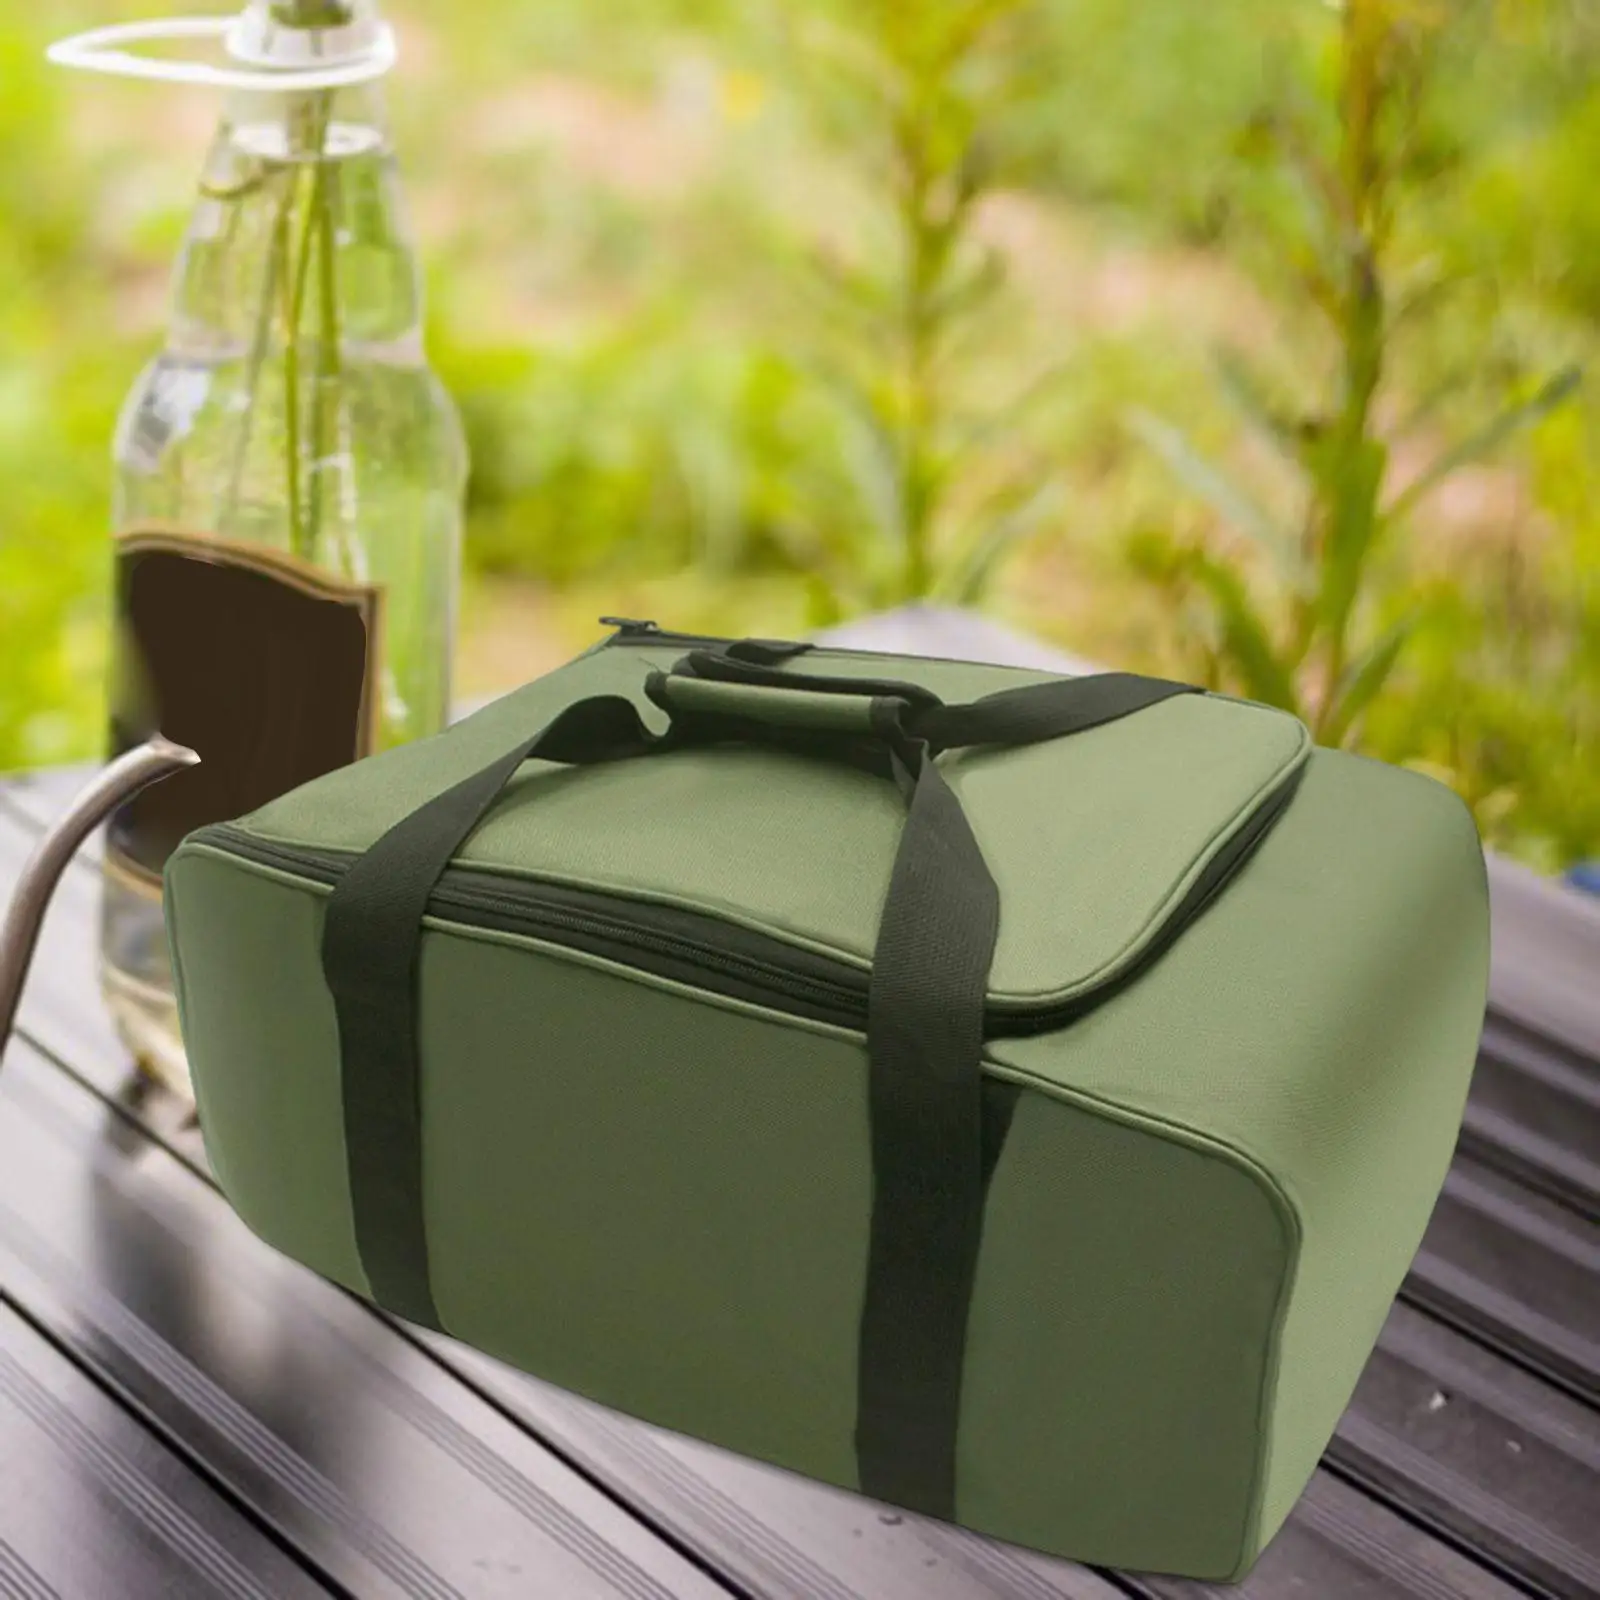 Gas Tank Storage Bag Equipment Waterproof Oxford Cloth for Camping BBQ Cookware Hiking